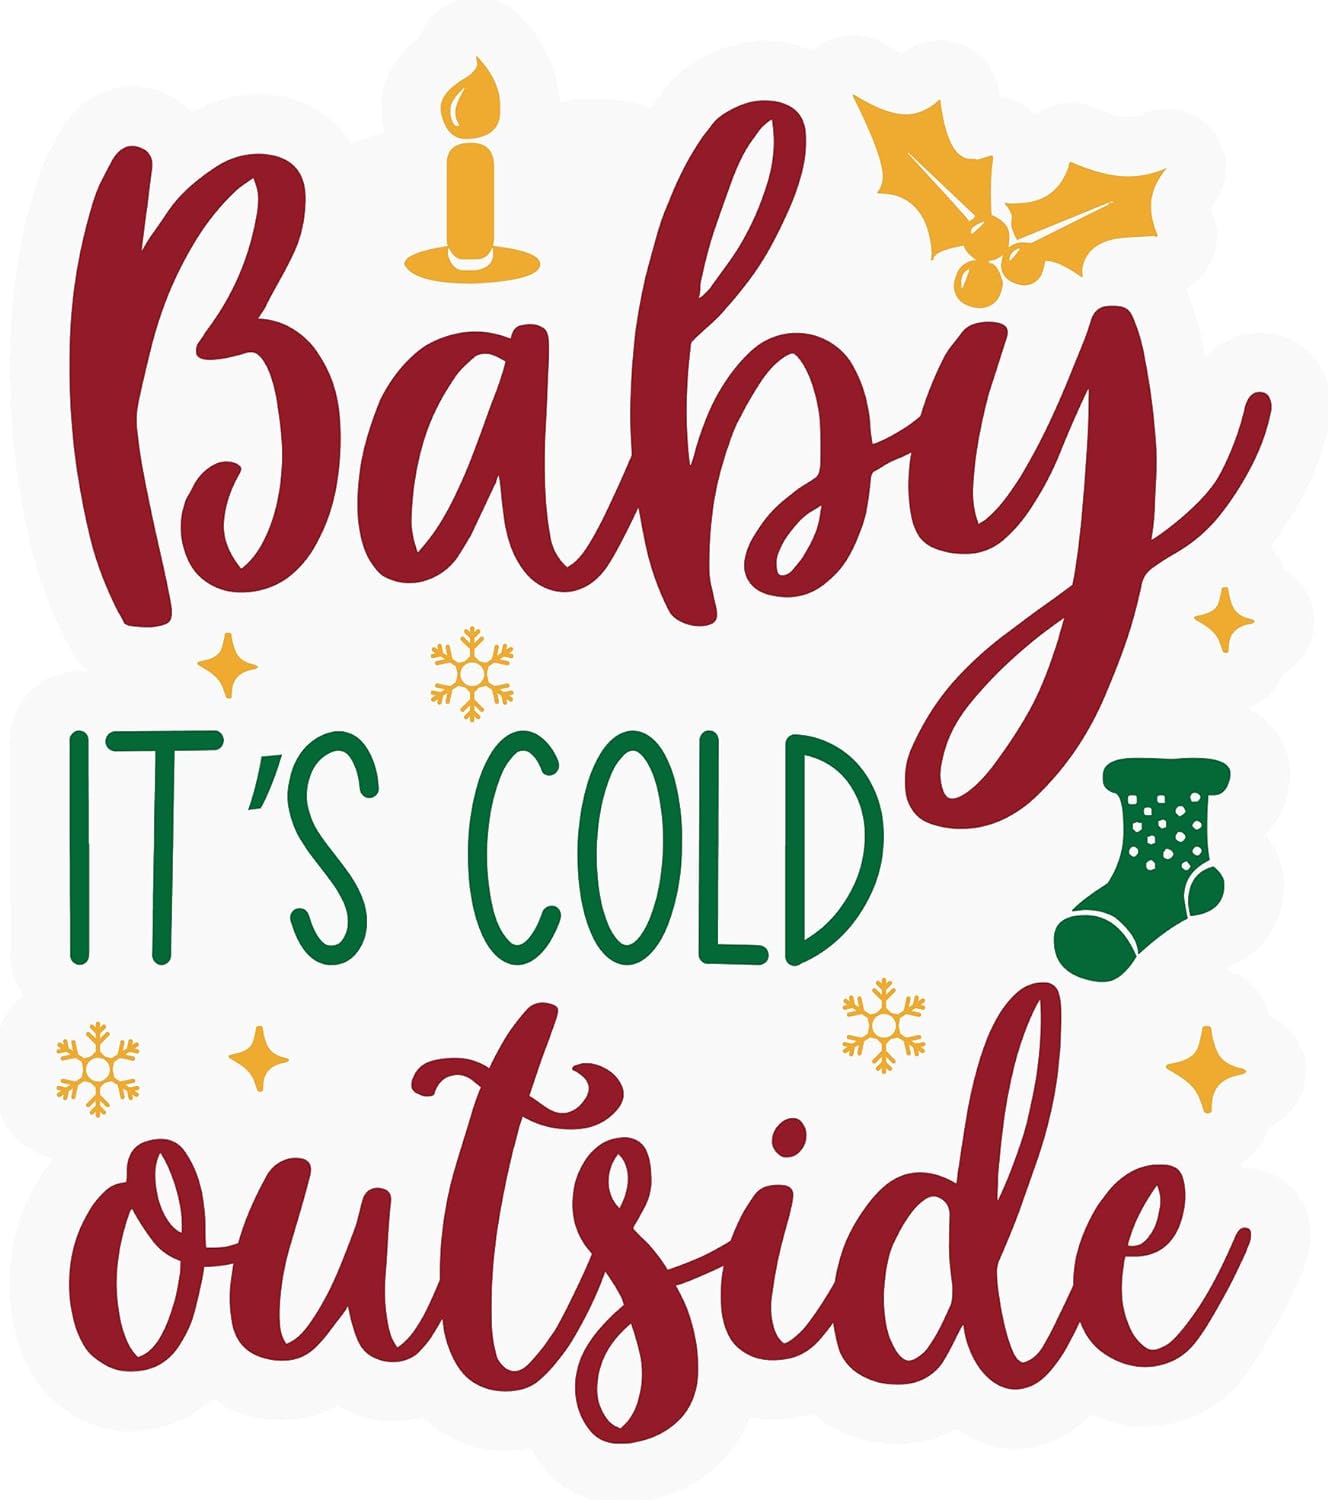 Inspirational Quote Baby It's Cold Outside Motivational Sticker Vinyl Decal Motivation Stickers- 5" Vinyl Sticker Waterproof